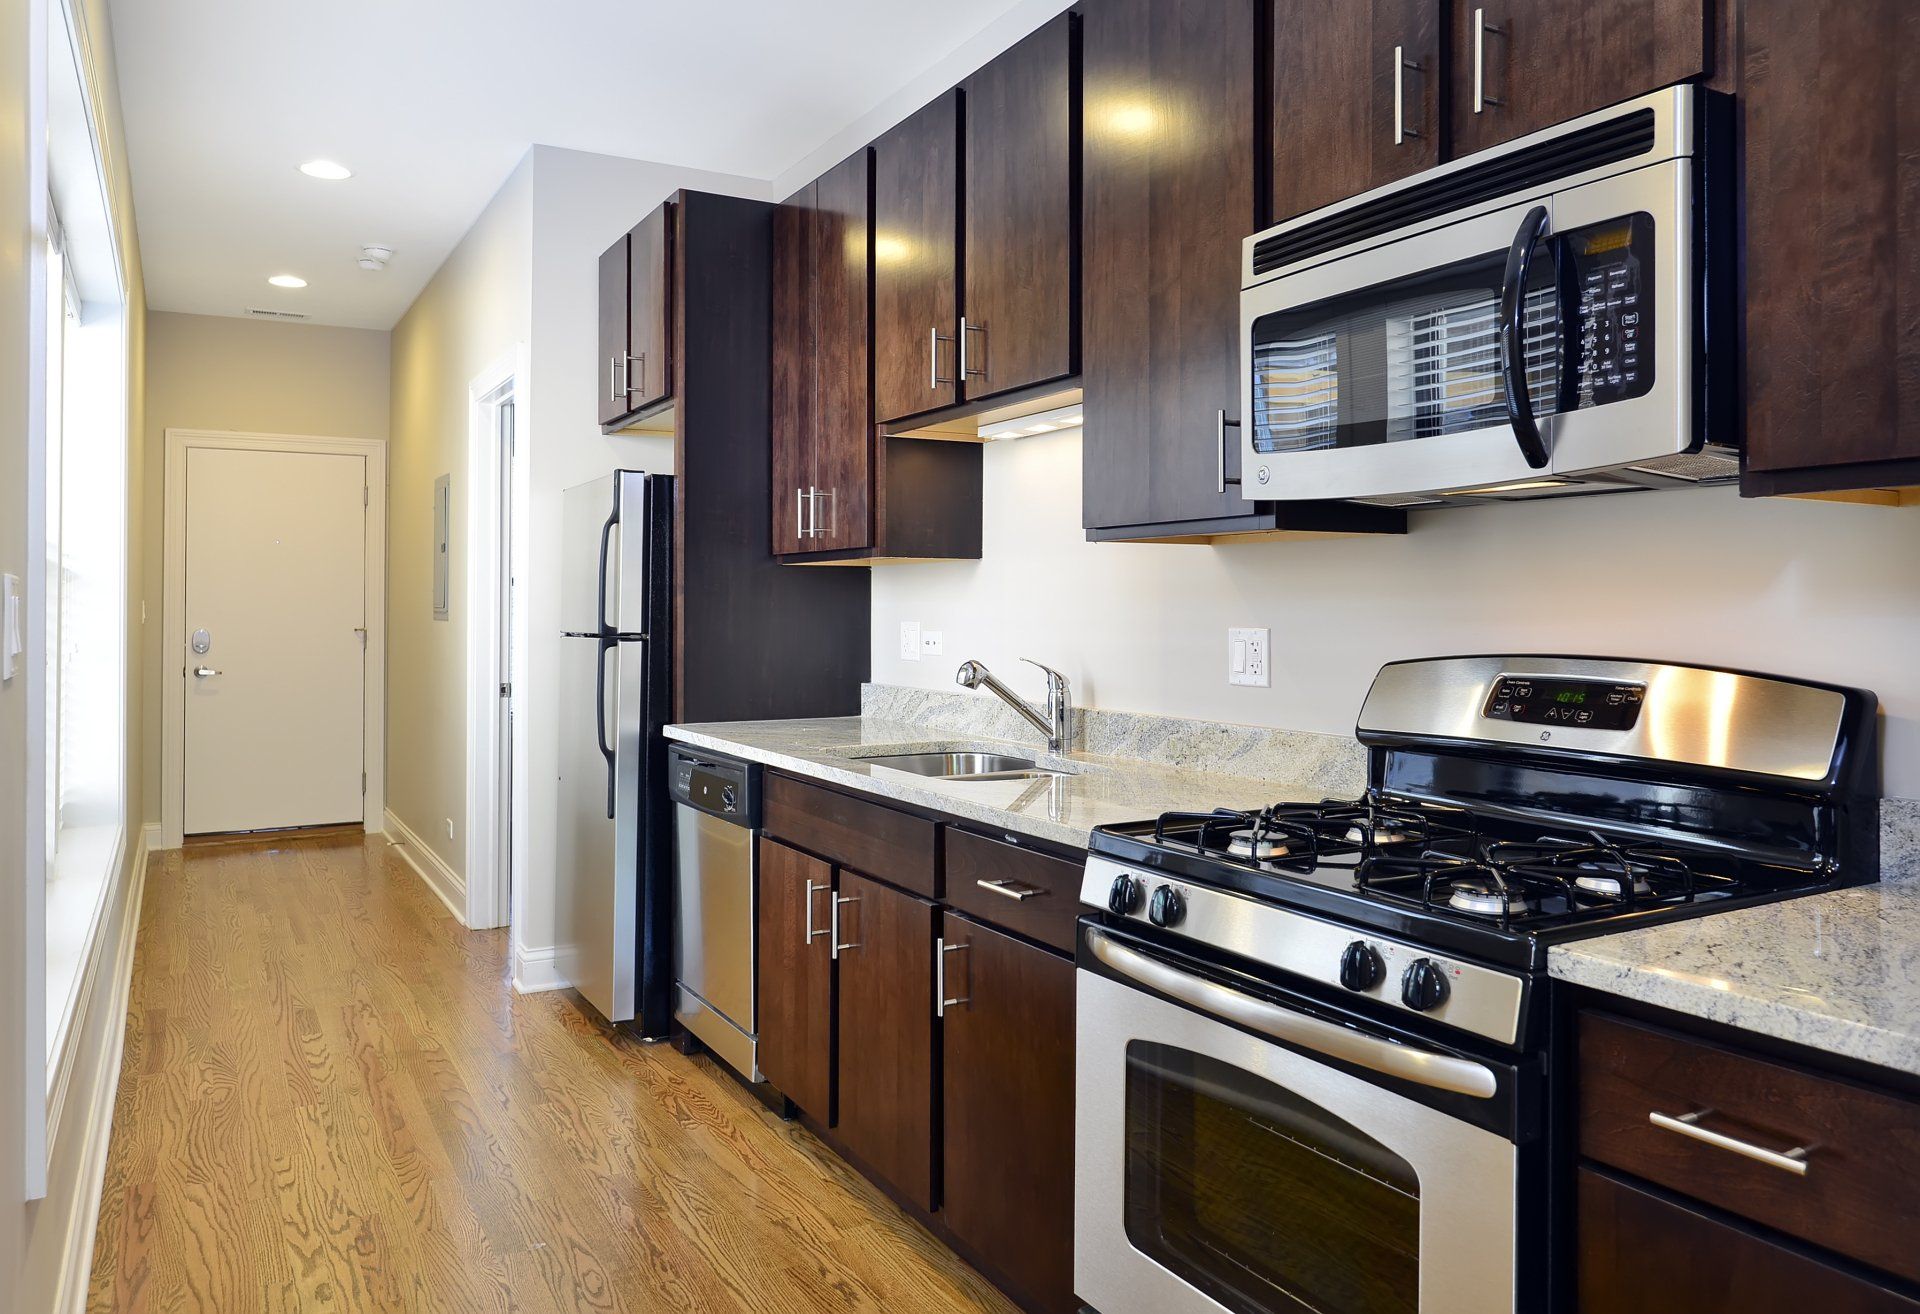 A kitchen with stainless steel appliances and wooden cabinets at The Belmont by Reside Flats.